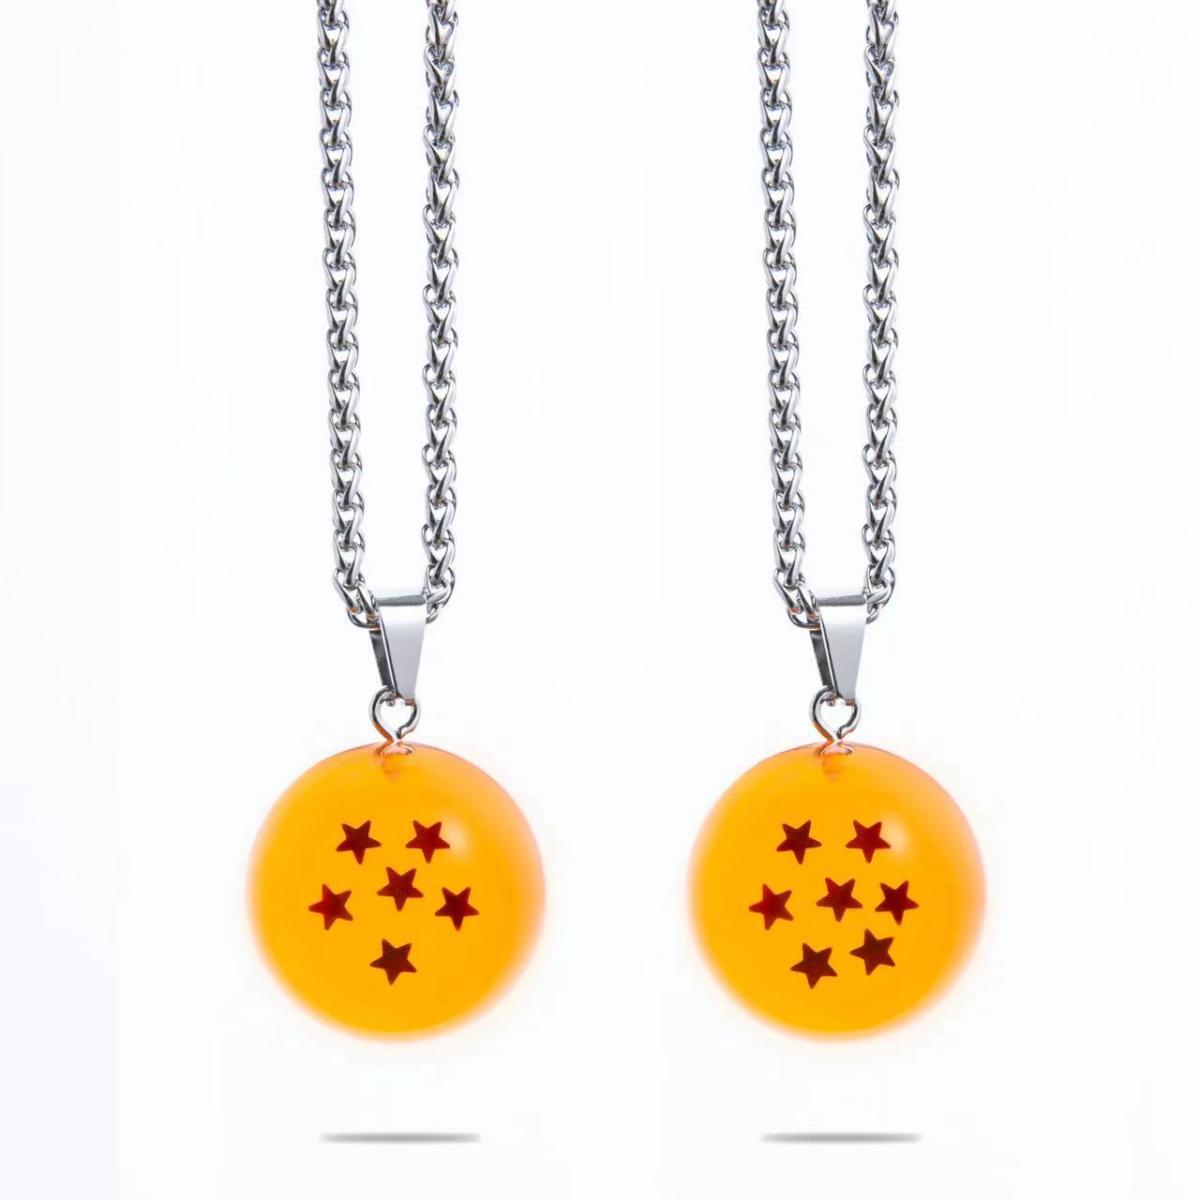 Cool necklaces and pendants related to popular anime seven Dragon Balls